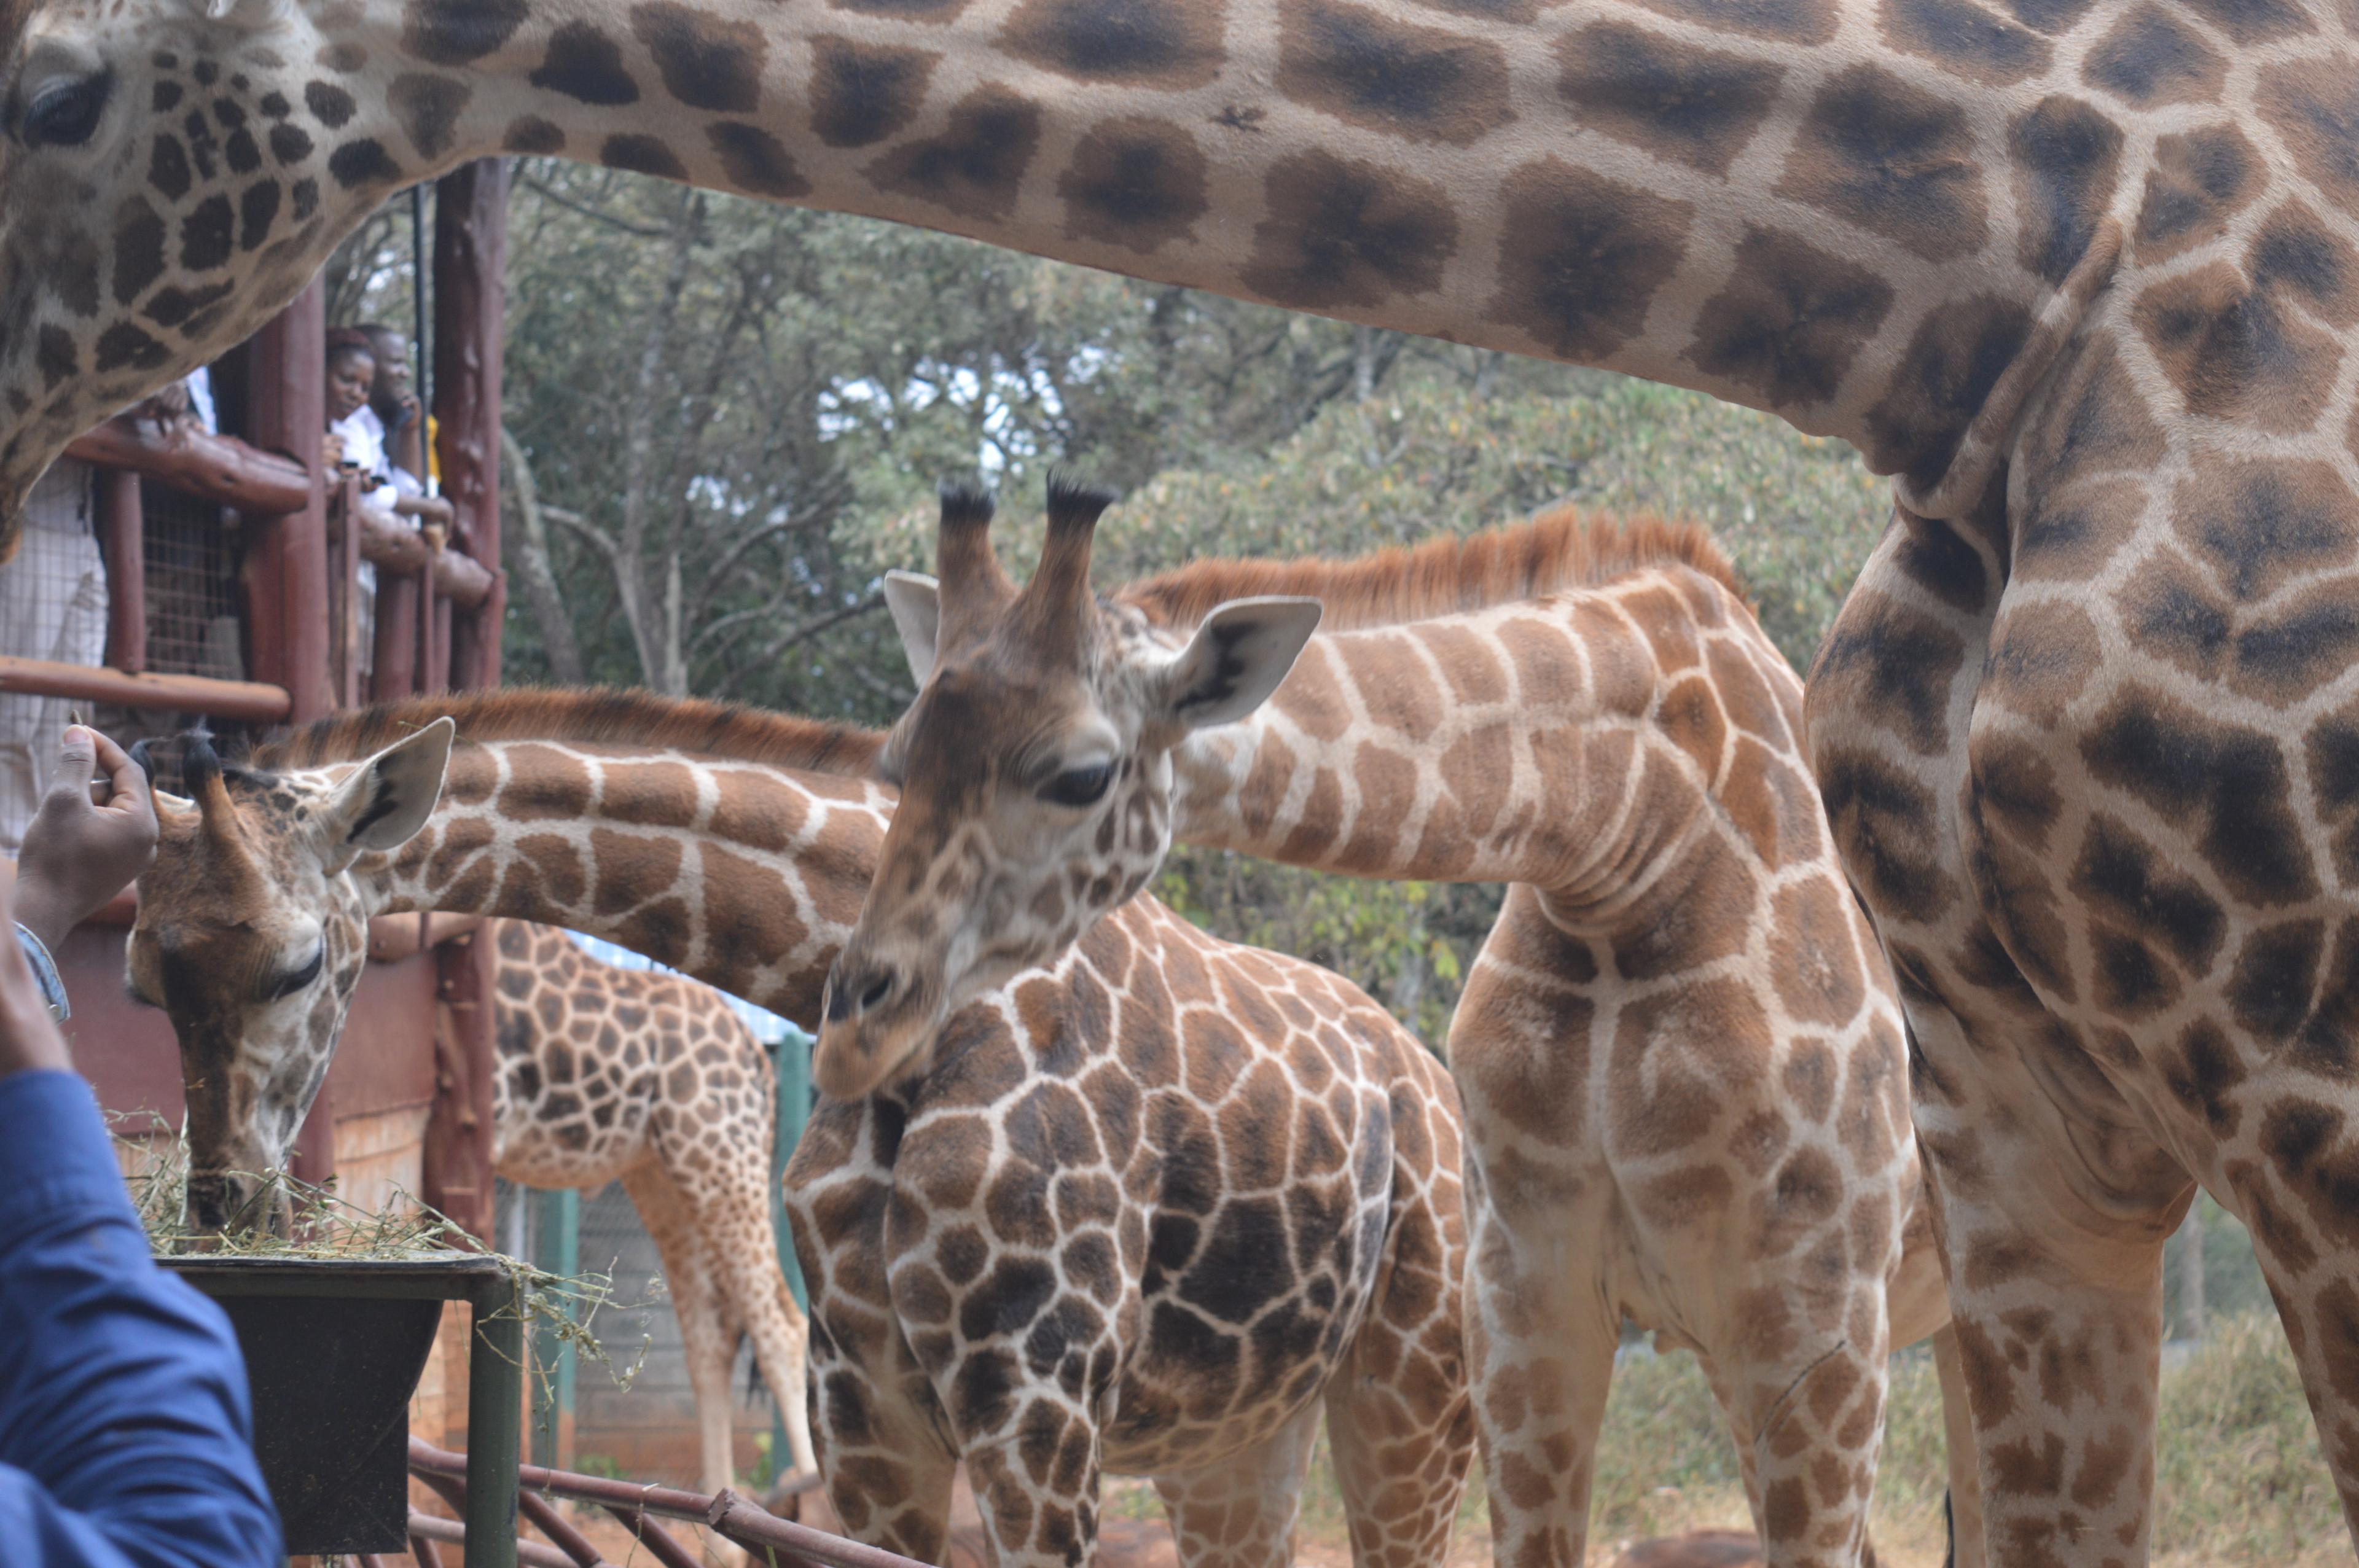 Cover image of this place Nairobi Giraffe Centre